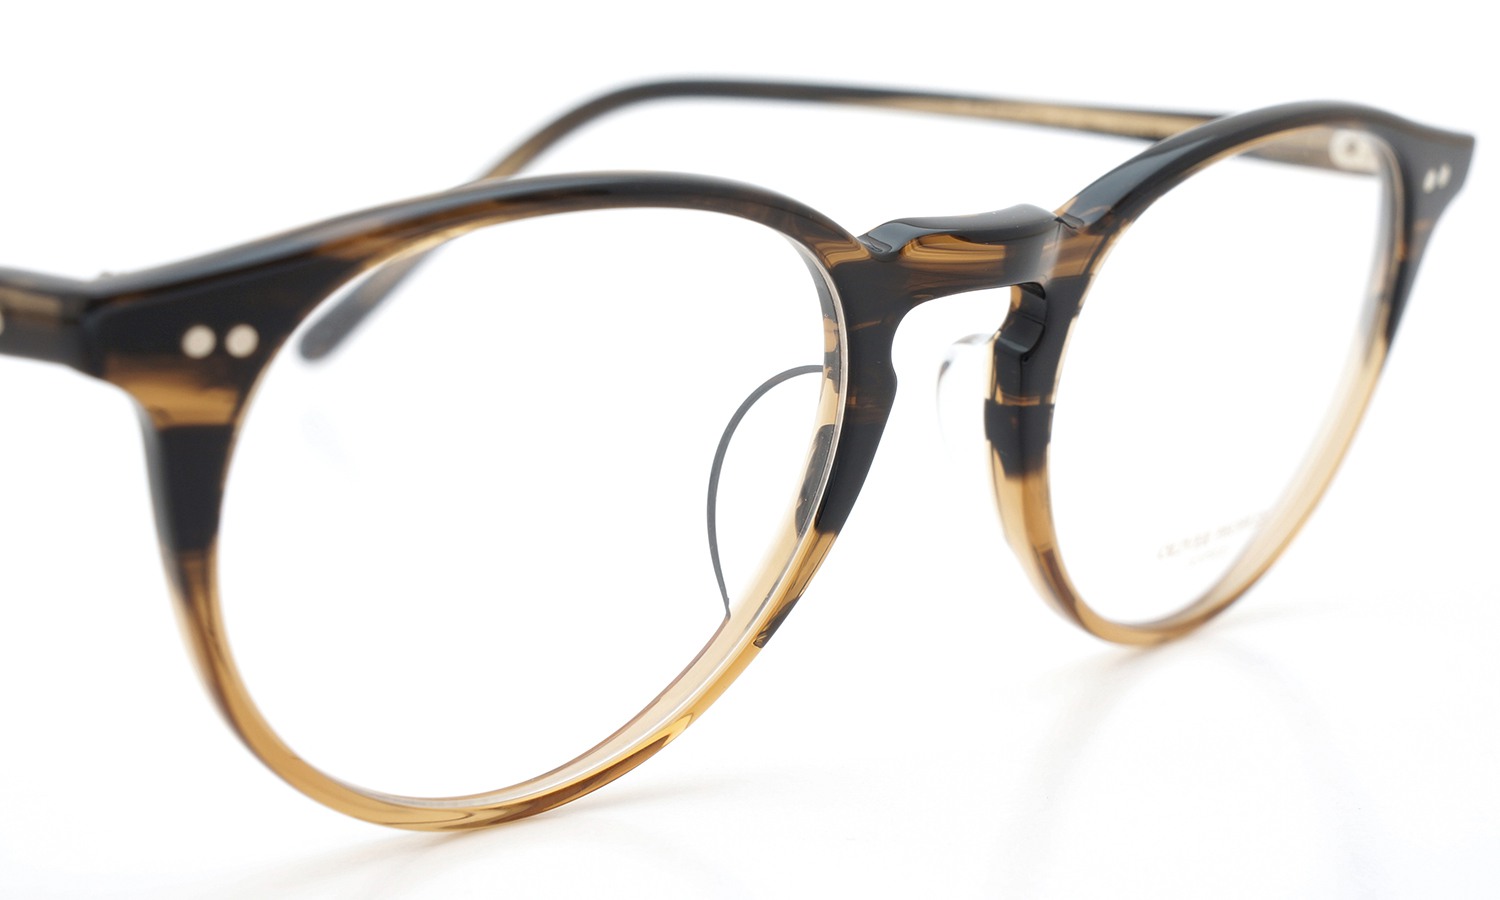 OLIVER PEOPLES (オリバーピープルズ) メガネ Riley-P-CF 48size 8108 Limited Edition